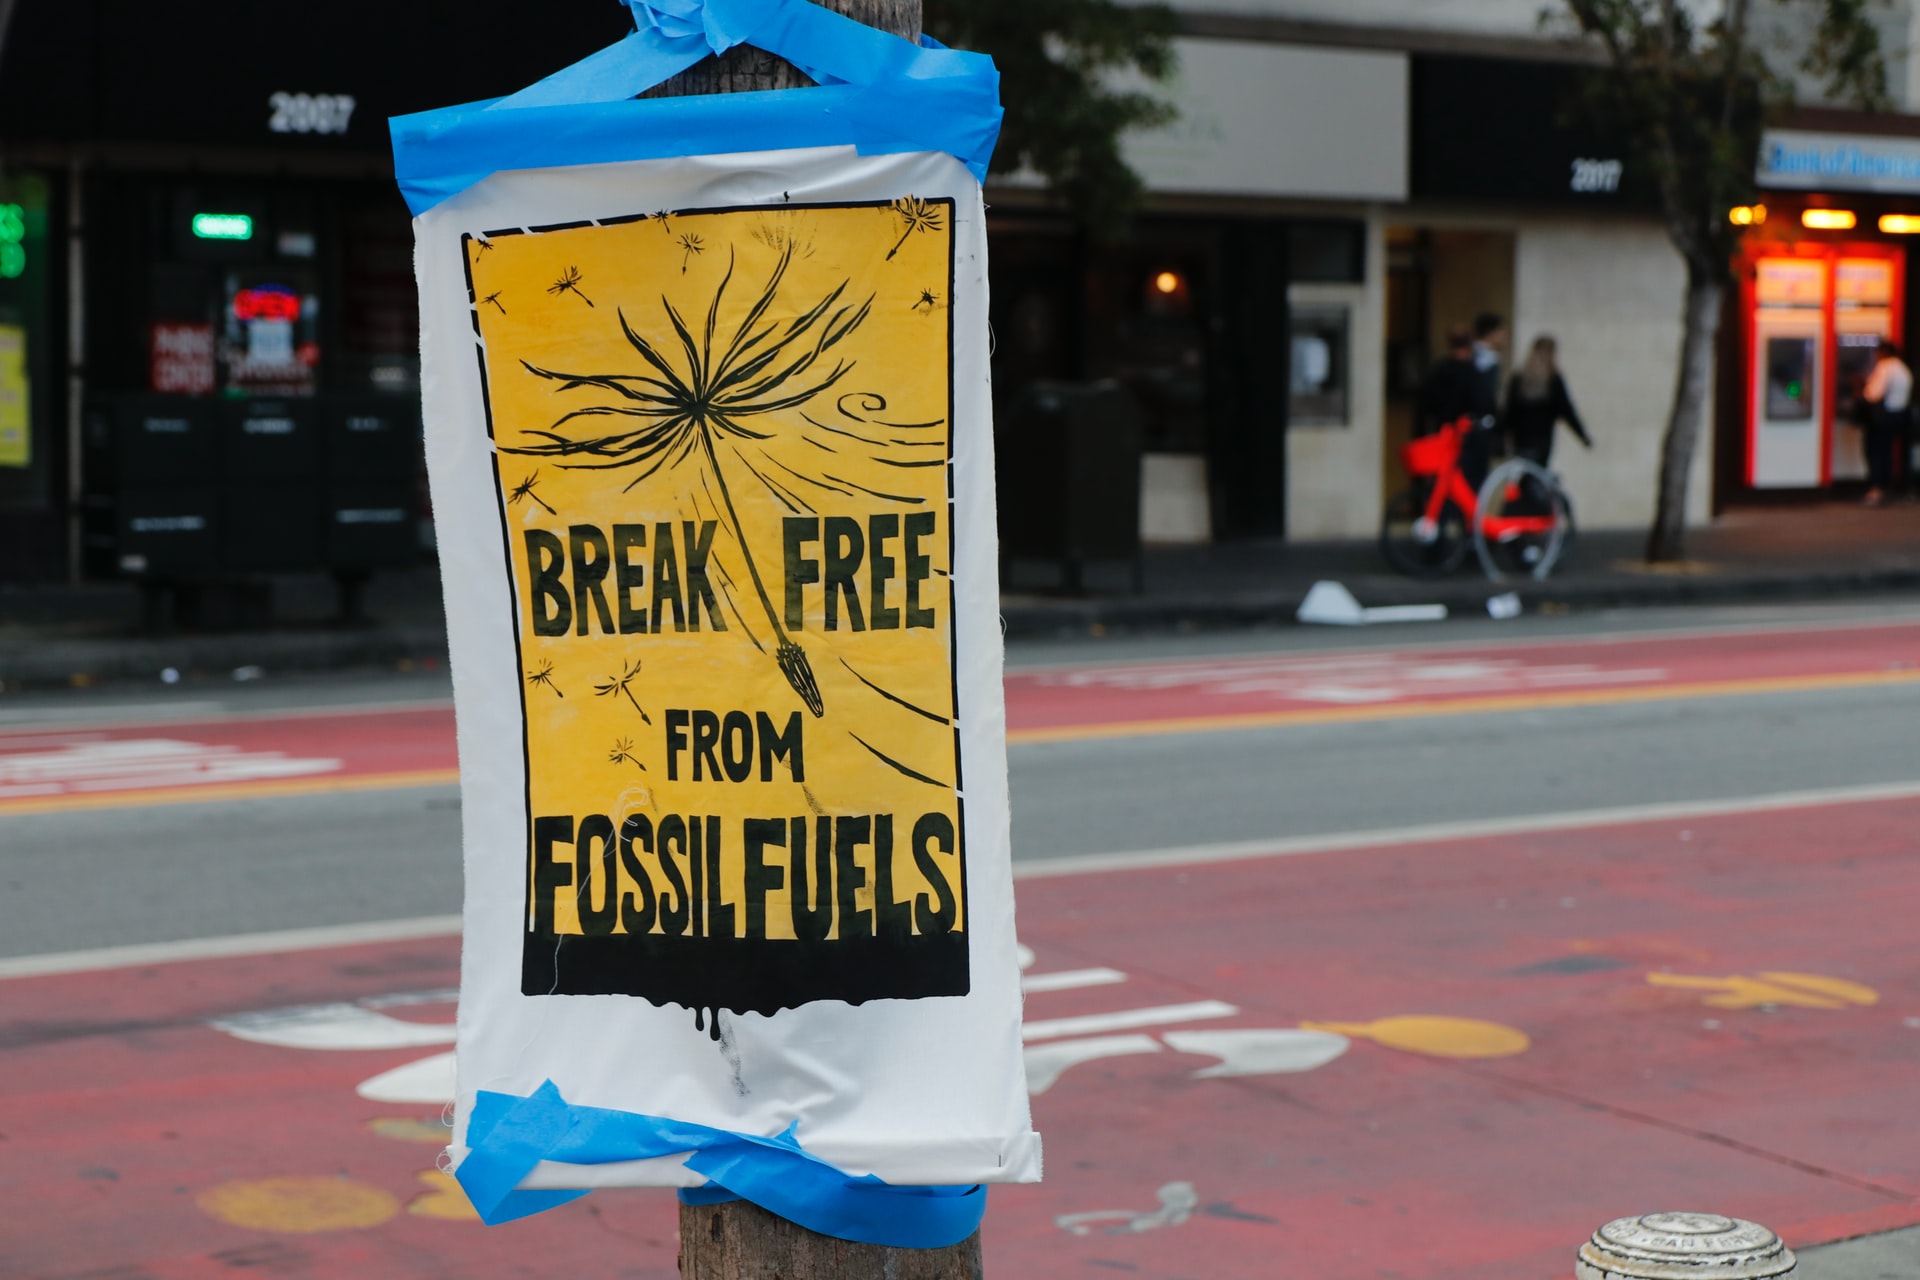 Break free from fossil fuels written across black and yellow poster.